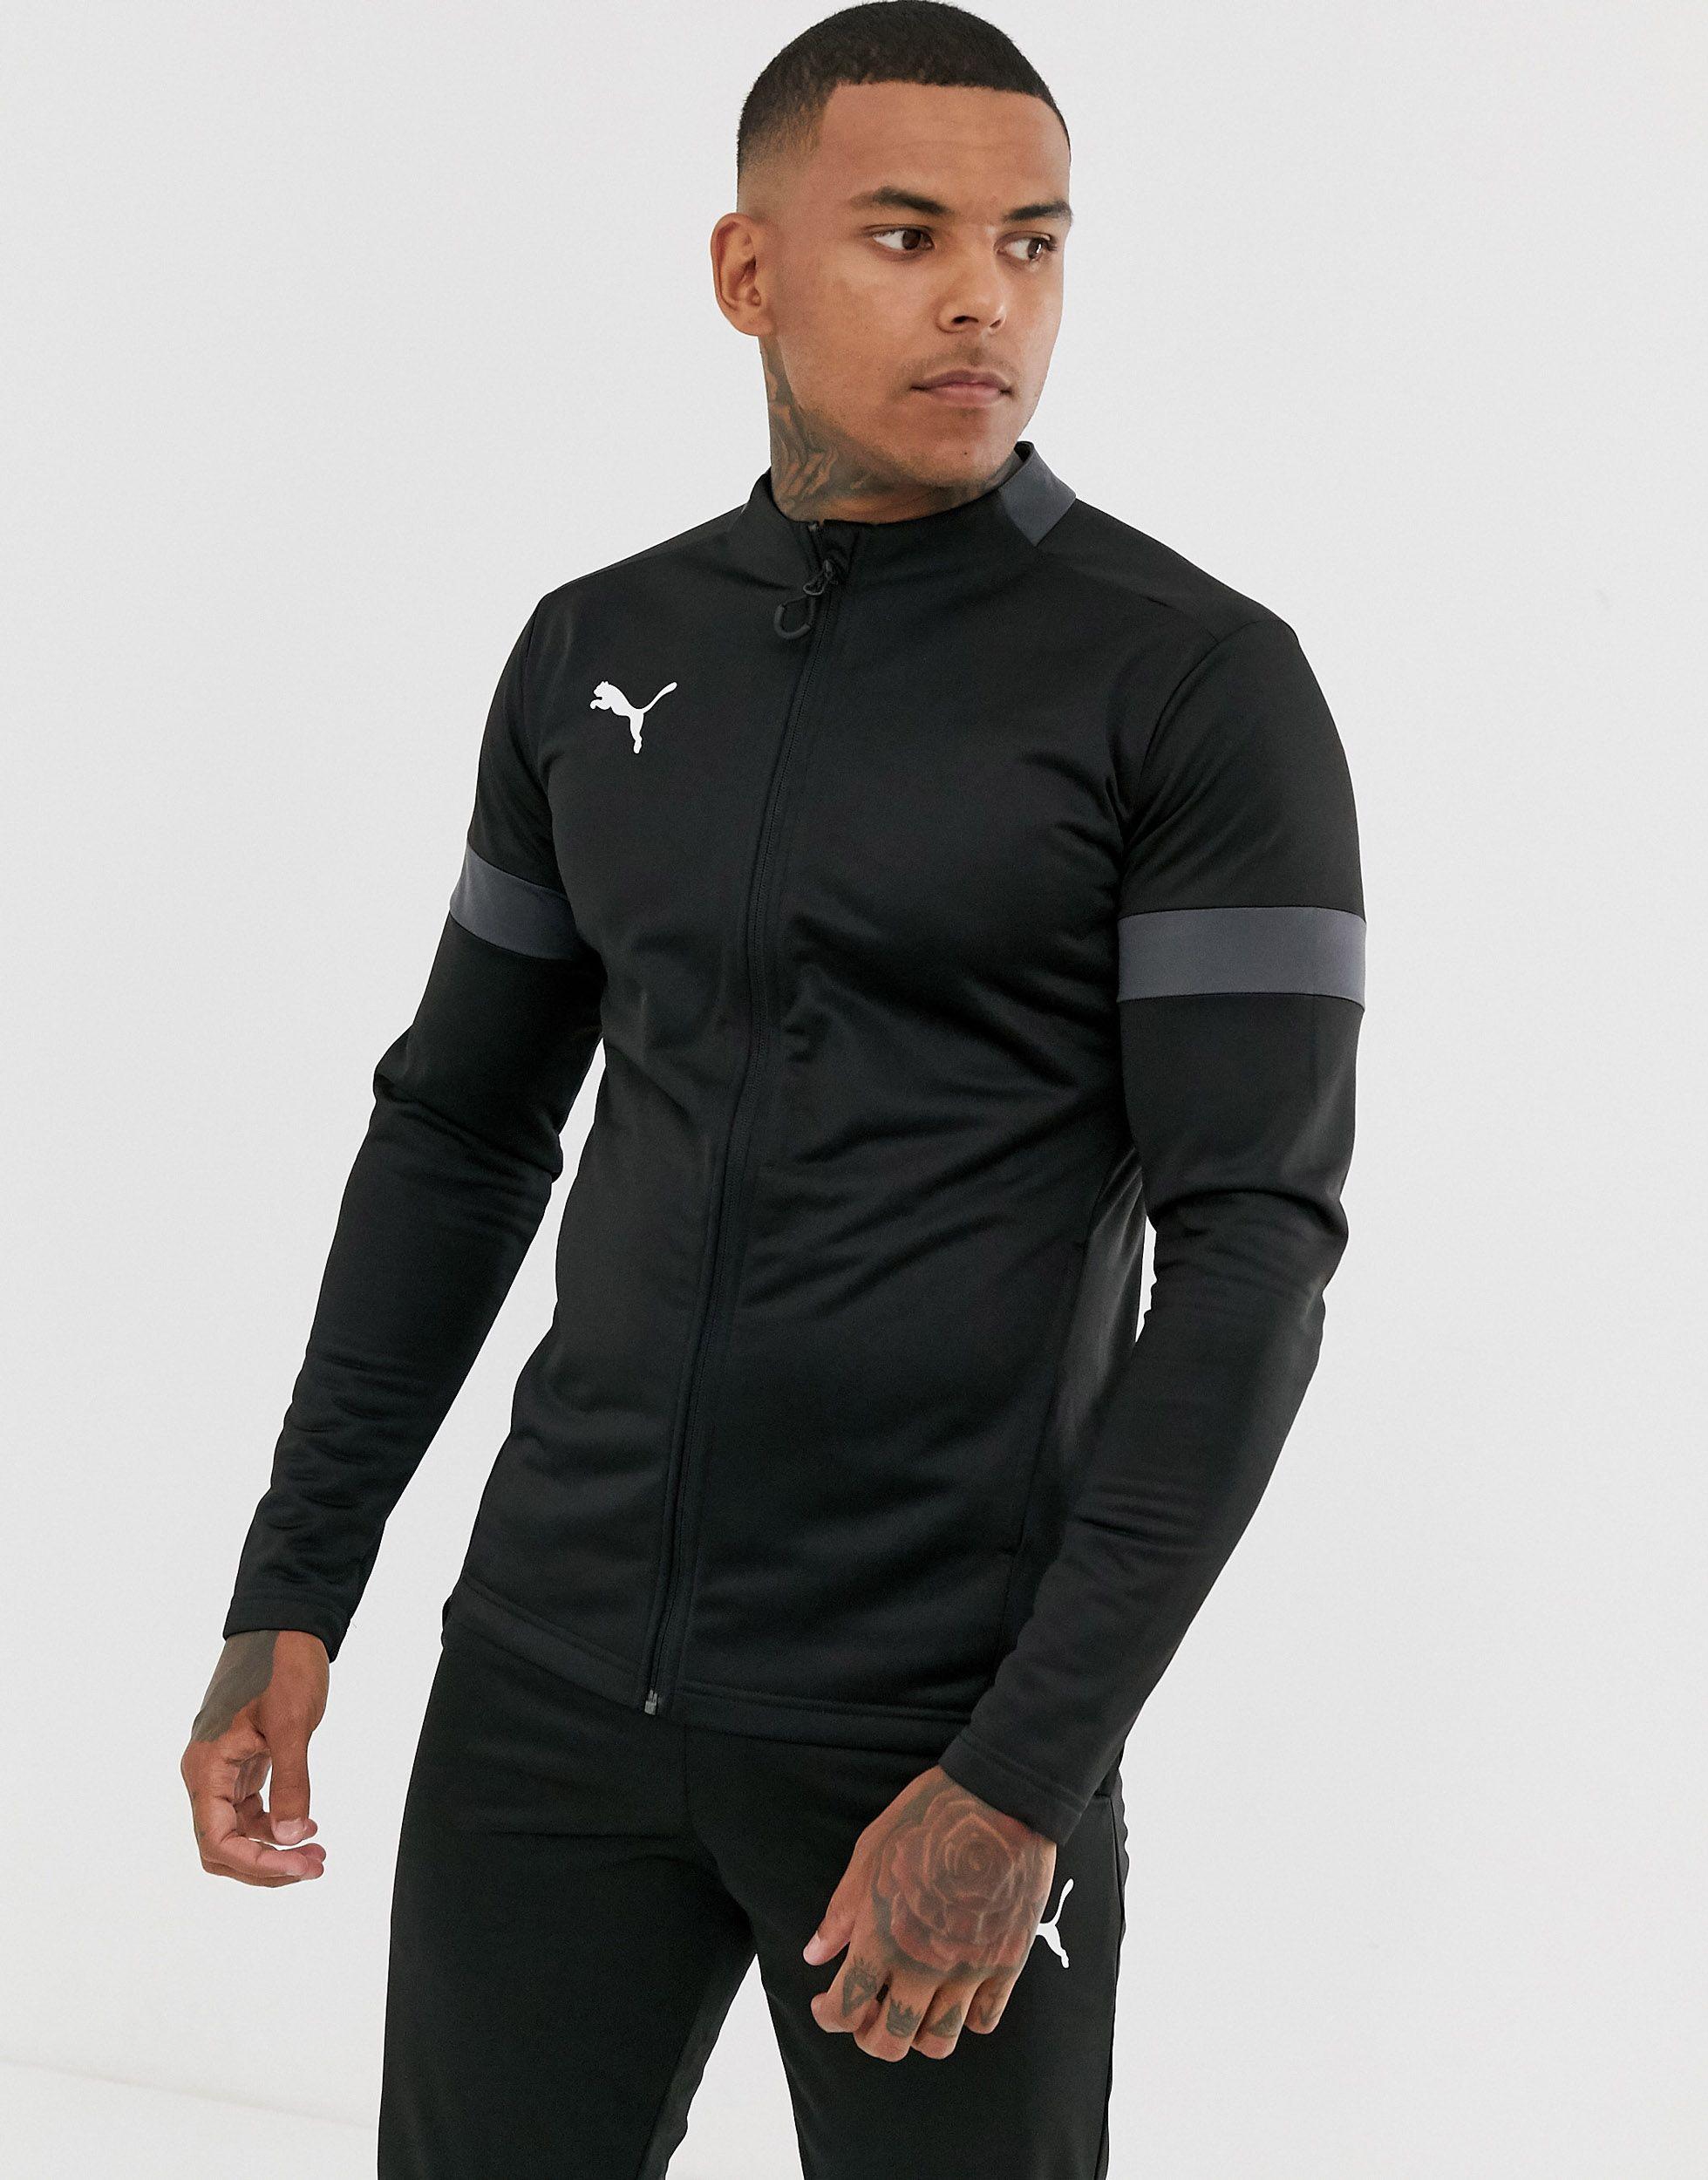 PUMA Synthetic Football Play Tracksuit in Black for Men - Lyst